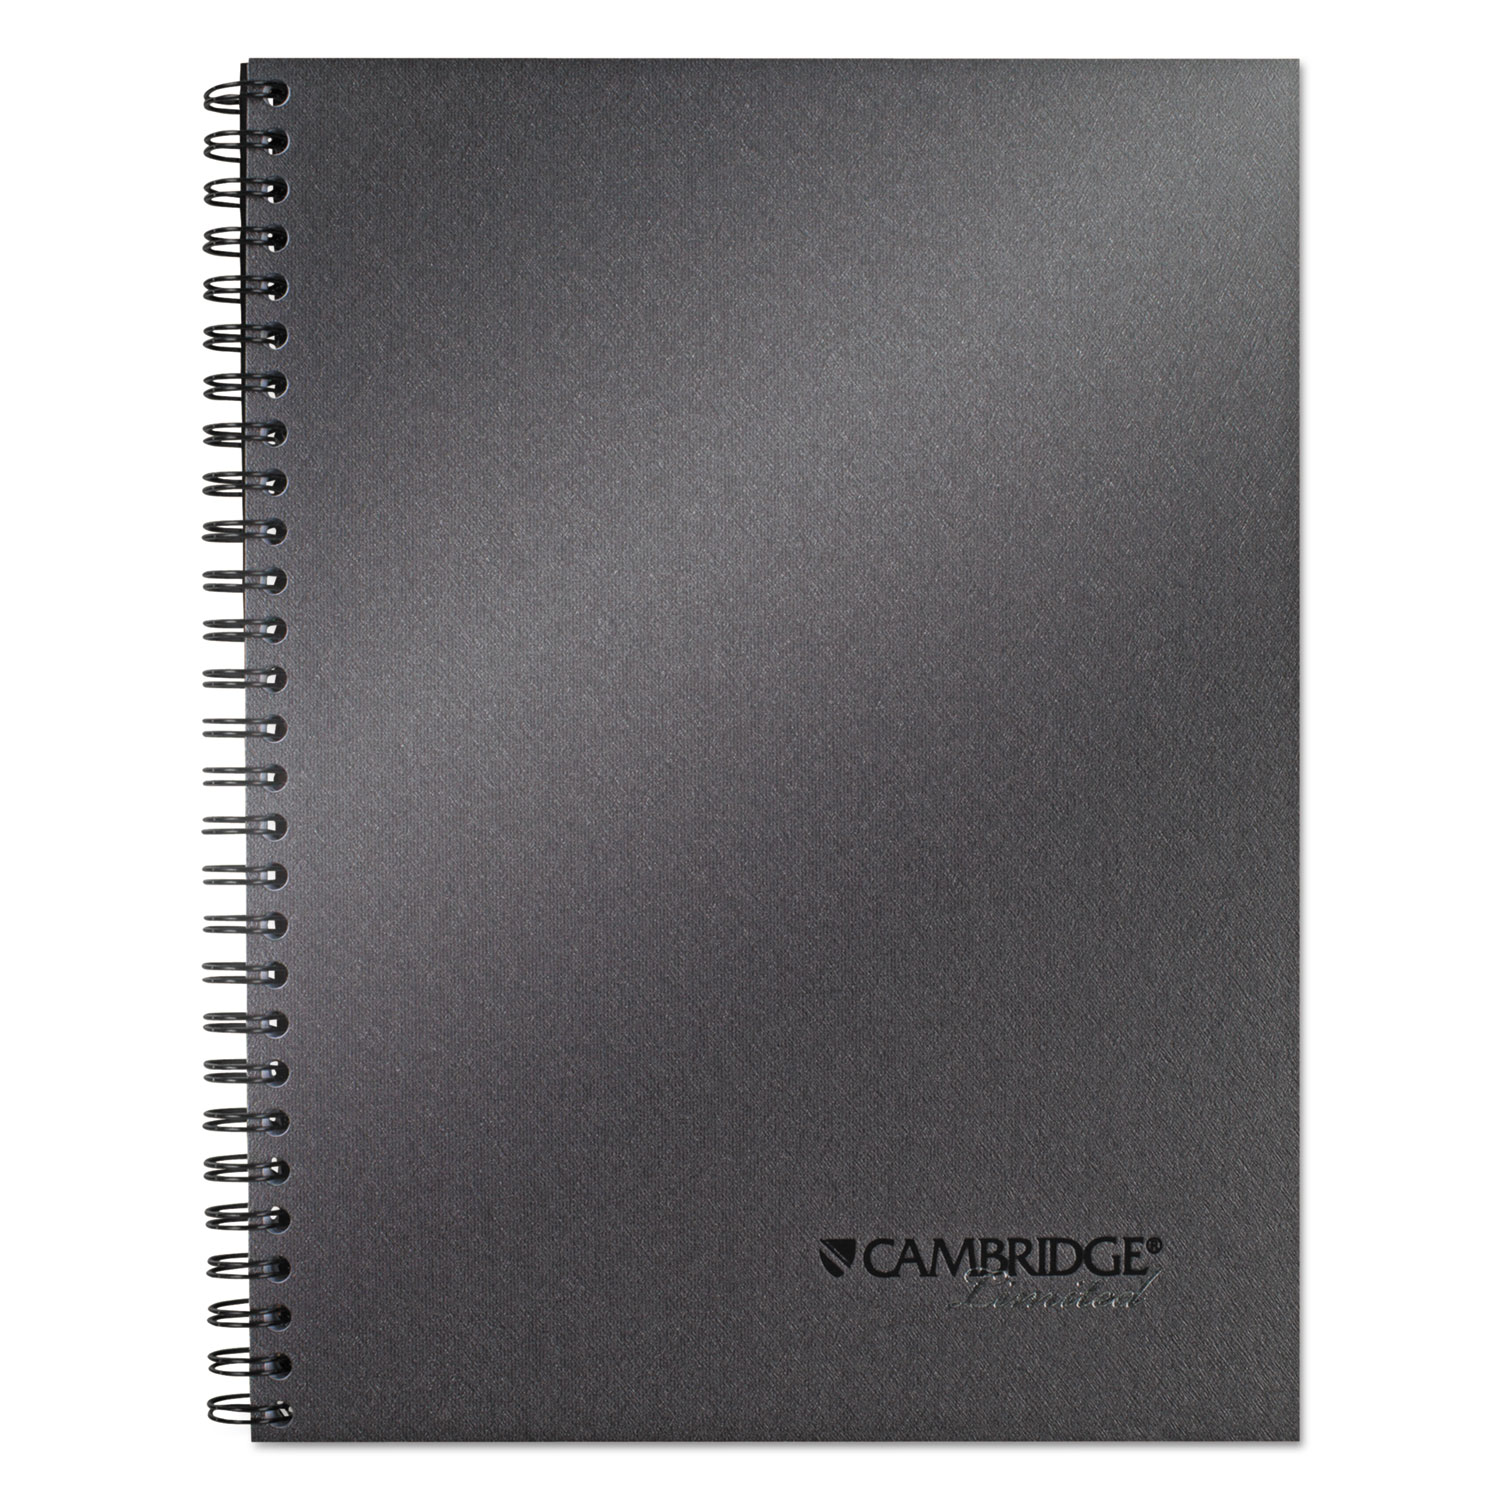 Side Bound Guided Business Notebook, 9 1/2 x 7 1/4, Metallic Titanium, 80 Sheets